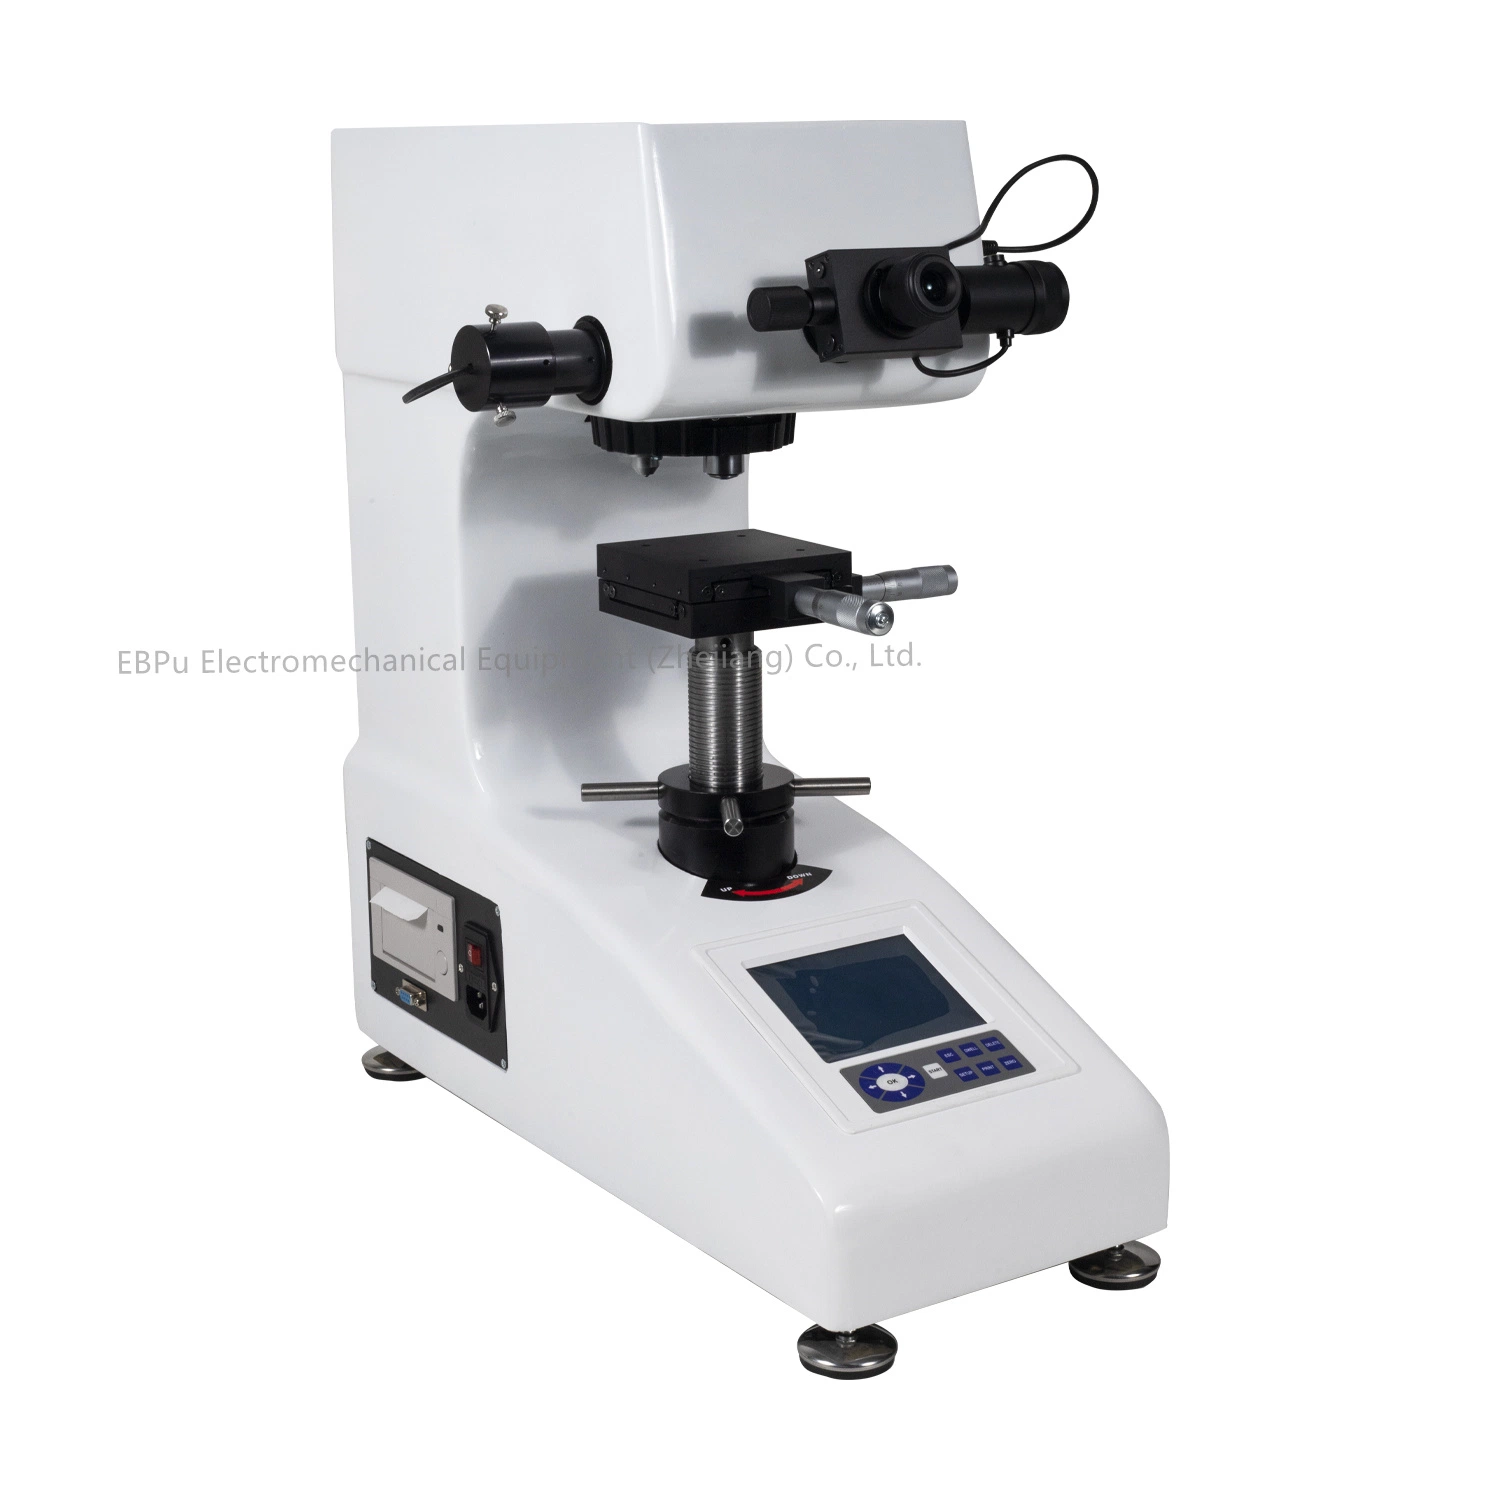 Macro Hardness Testing Machine with Computer and Hardness Measuring Software System